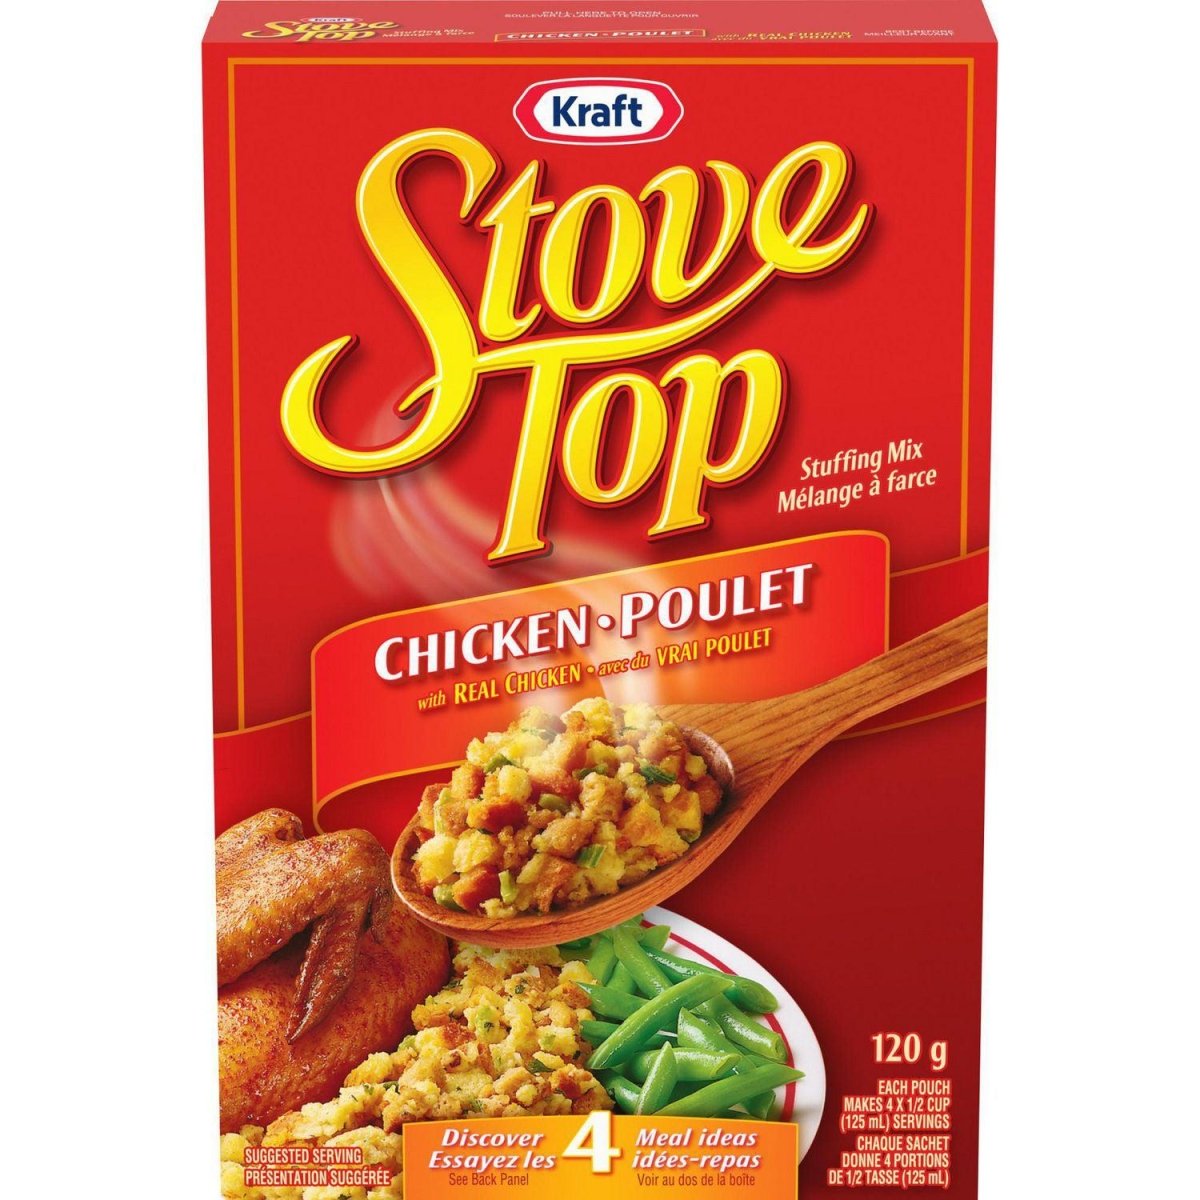 Kraft Stove Top Chicken Stuffing 120g - Candy Mail UK